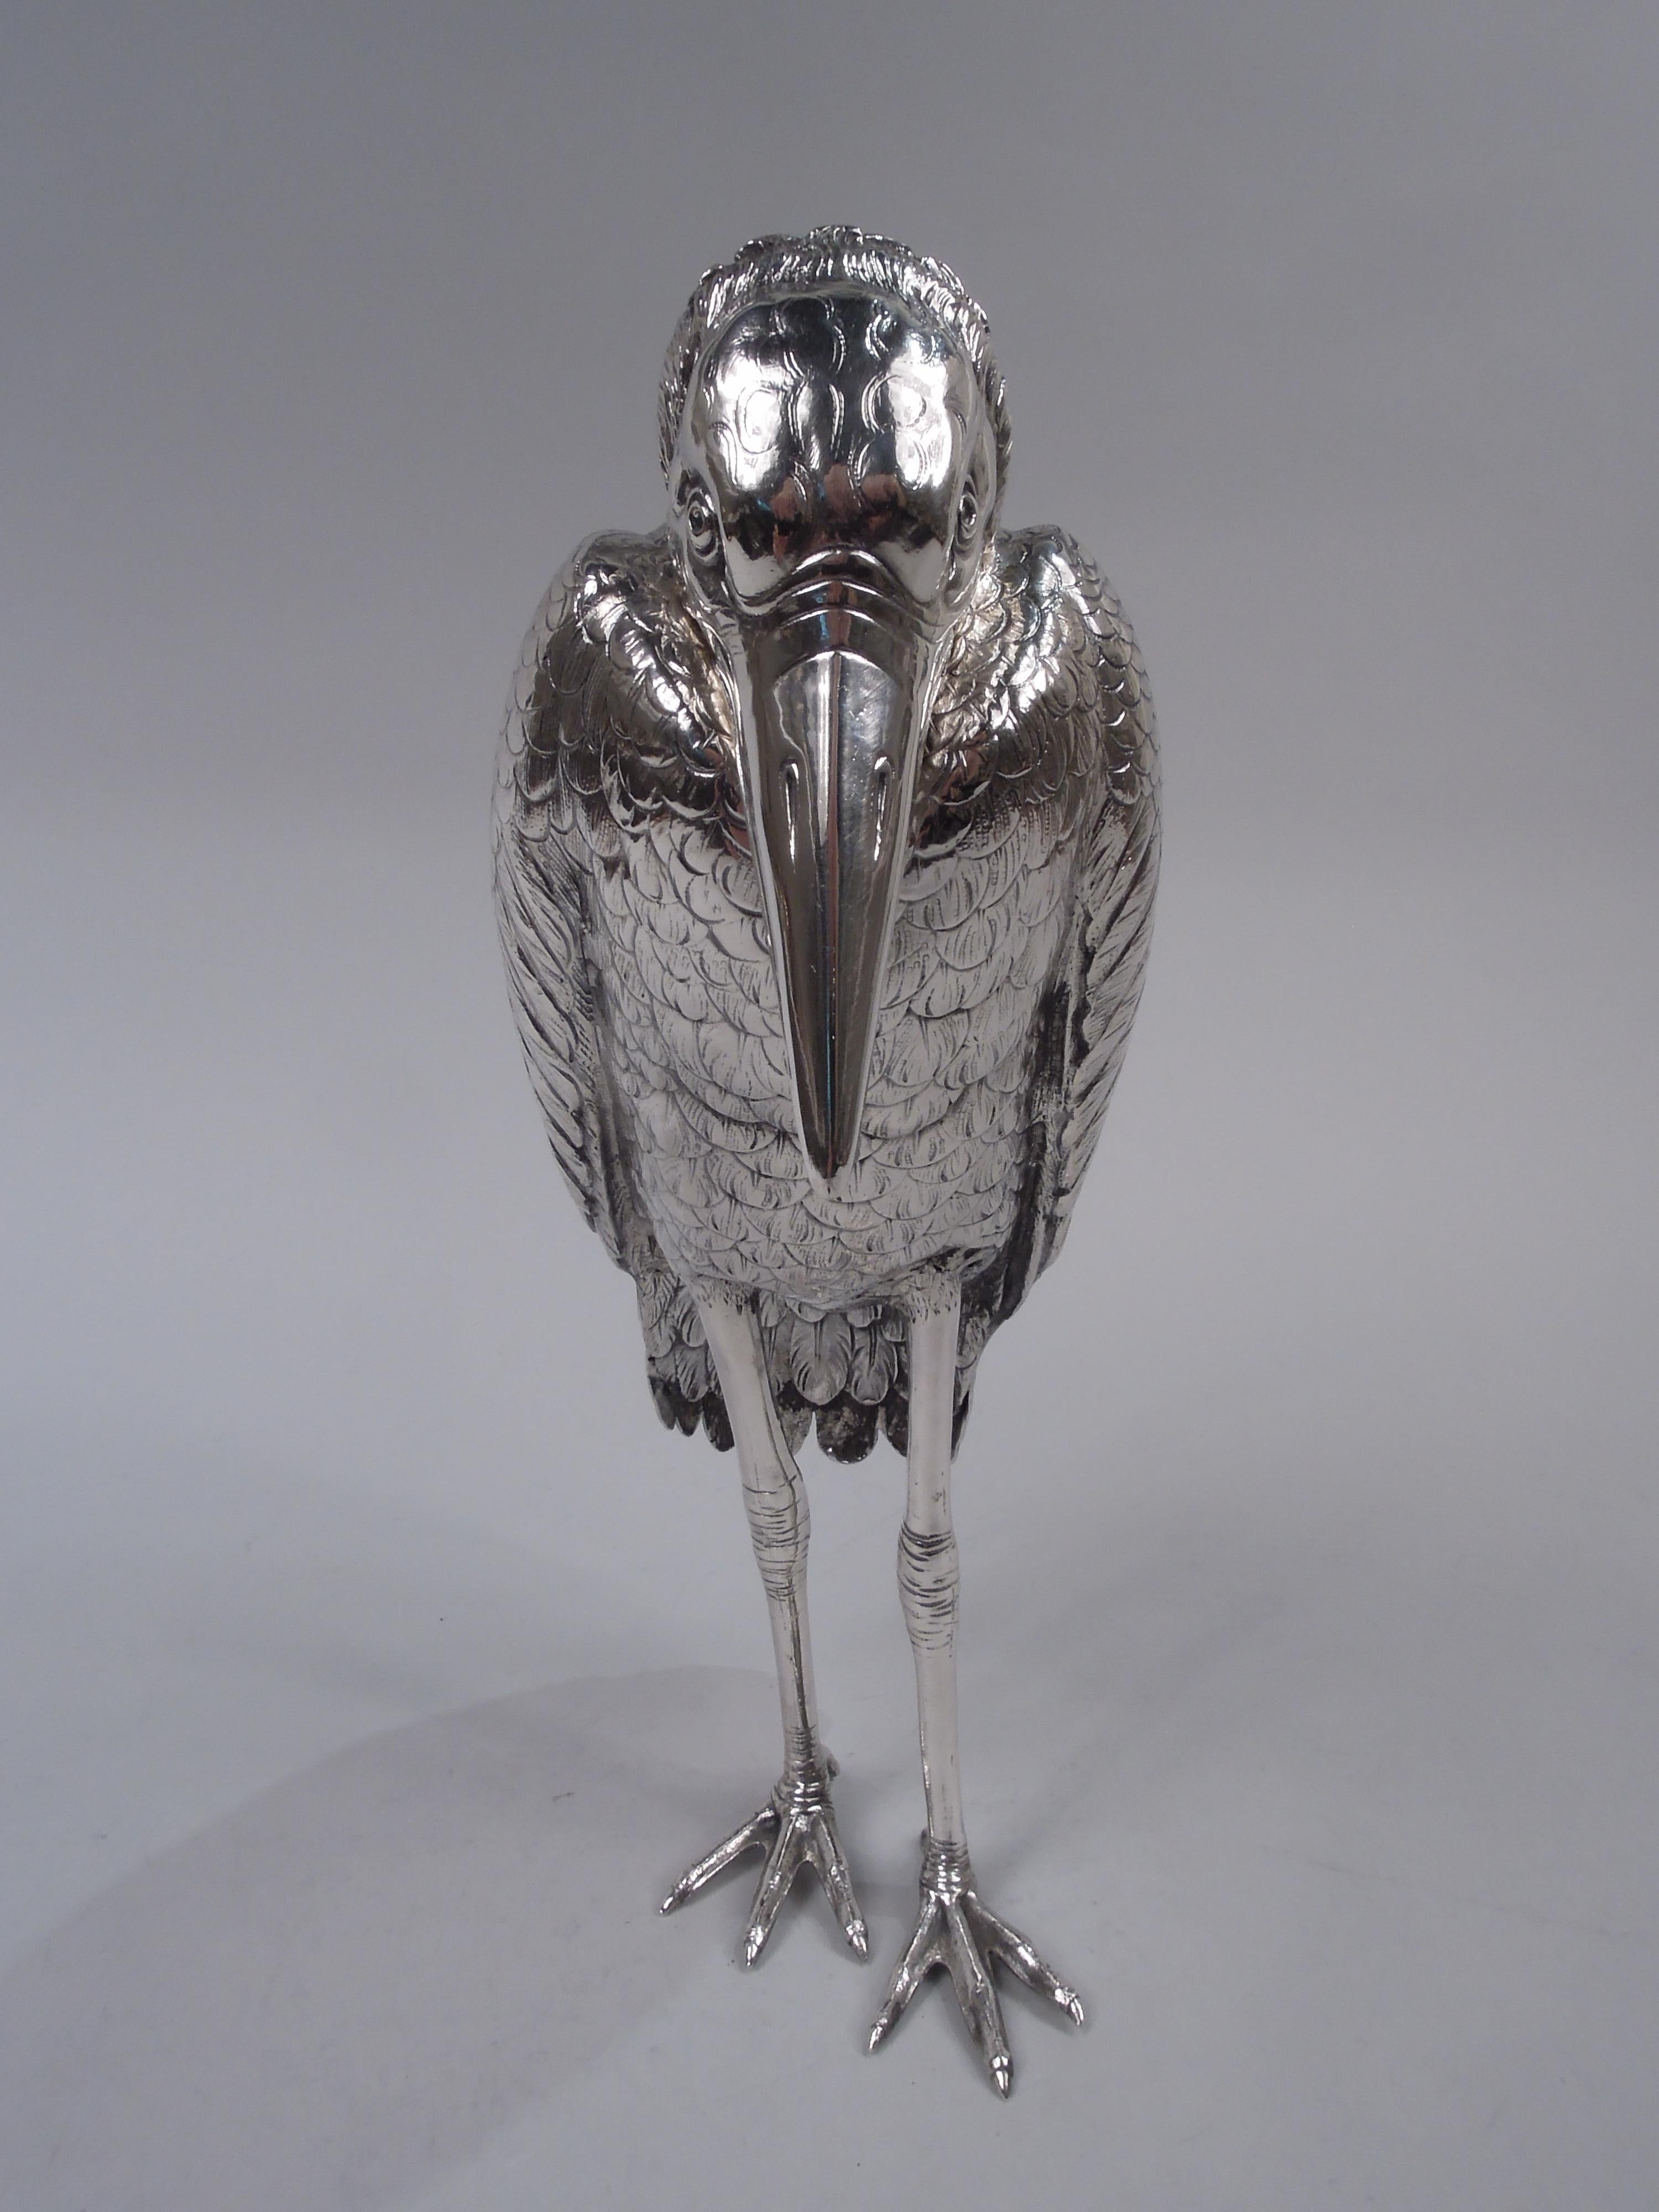 German 800 silver figural bird spice box, ca 1900. A raven with hunched shoulders, tucked-down wings, and spindly legs; detachable head downturned with pensive eyes and long pointed beak. A brooding desk ornament guaranteed to ensure stately